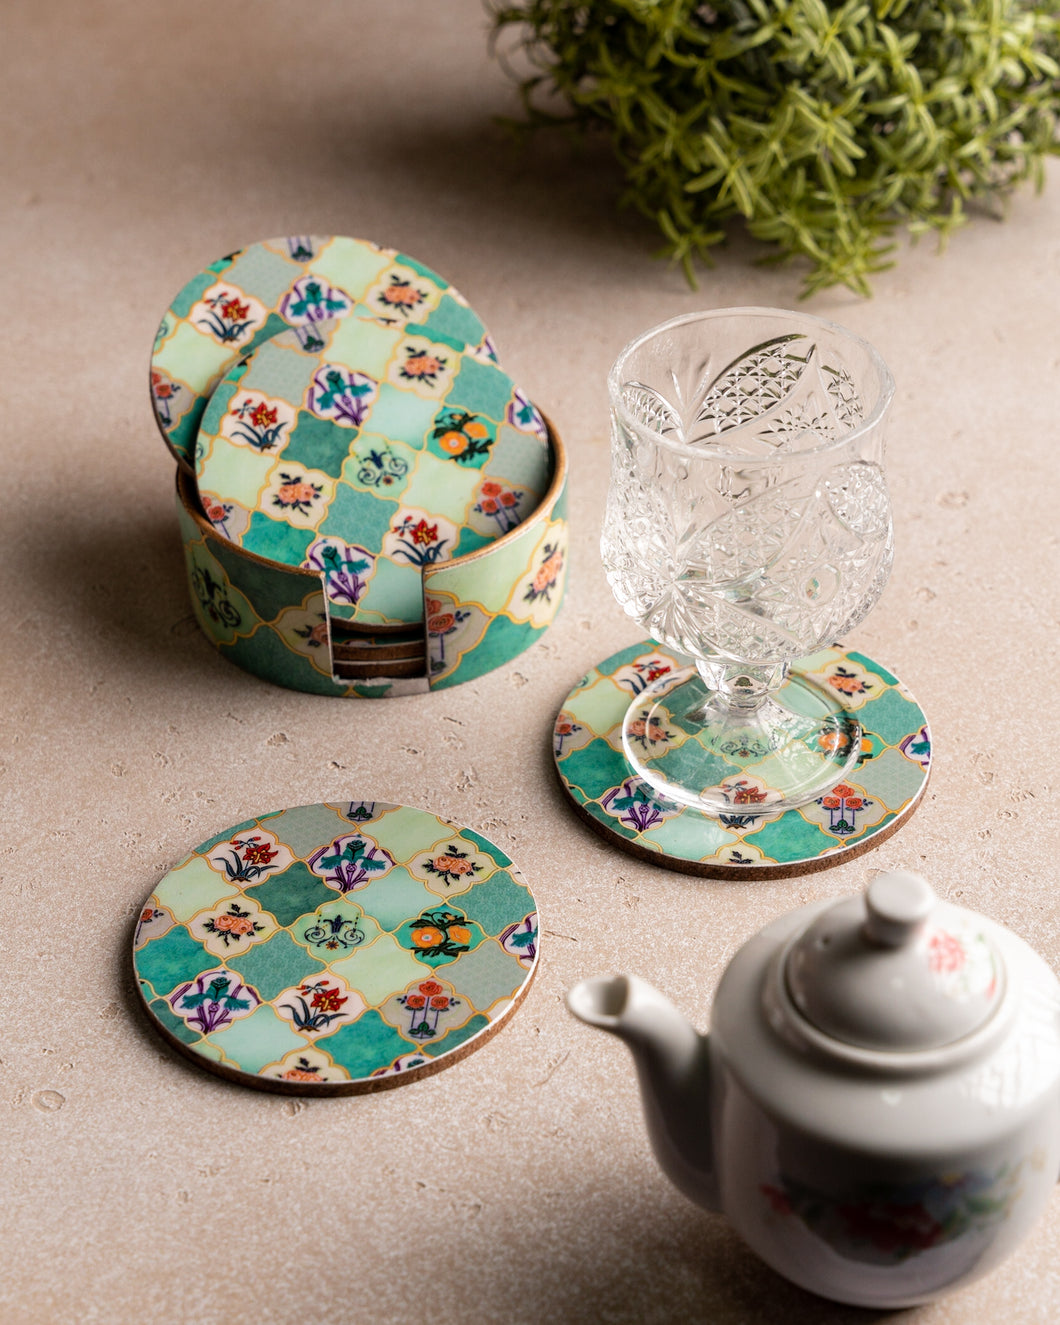 The Teal Set of 6 Coasters